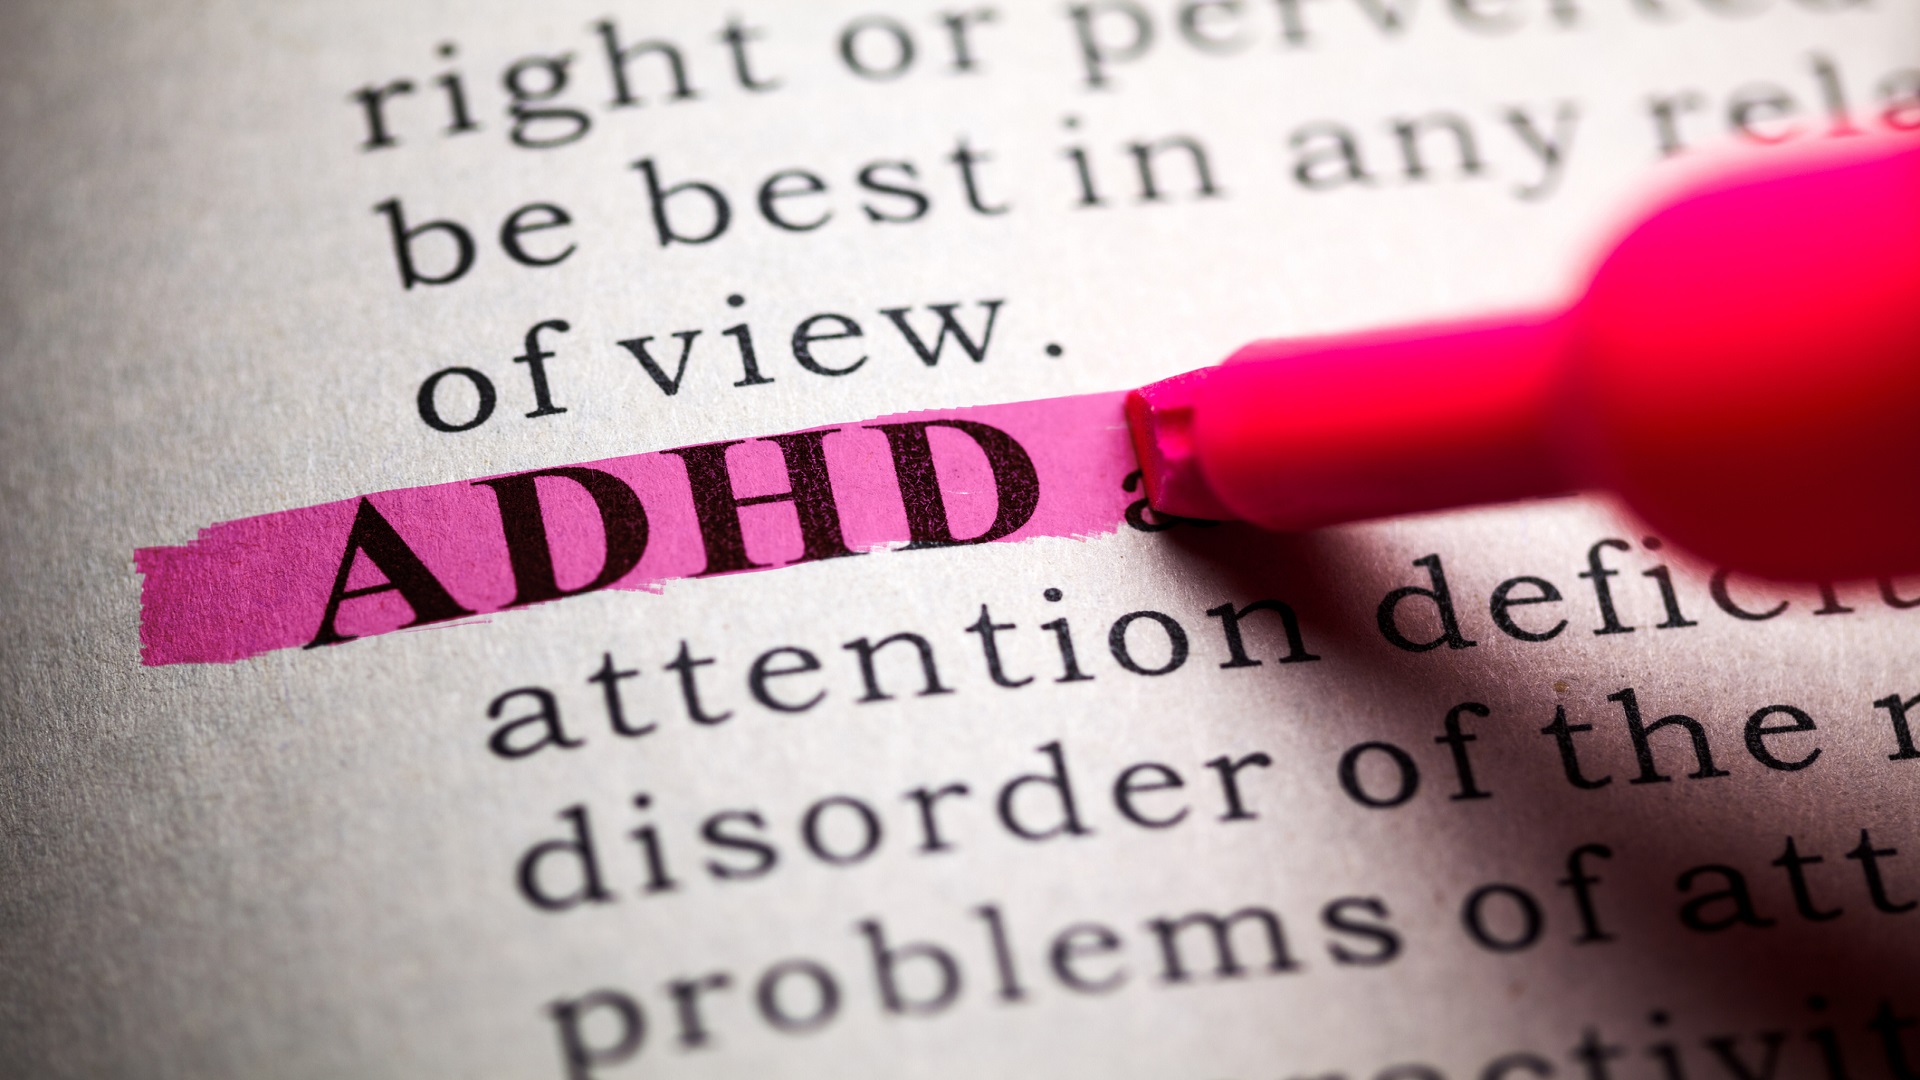 test to adhd determine adult